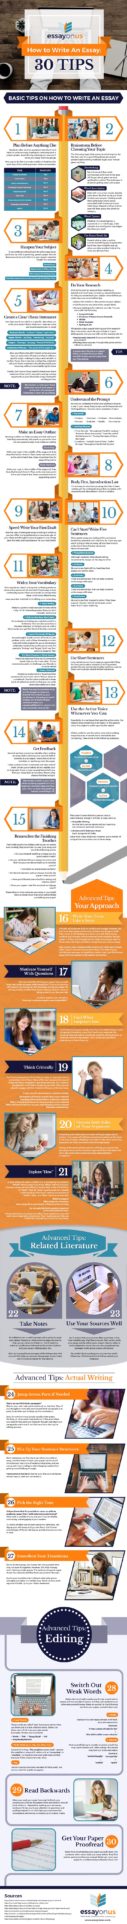 Complete Guide on How to Write an Essay: 30 Tips Revealed!